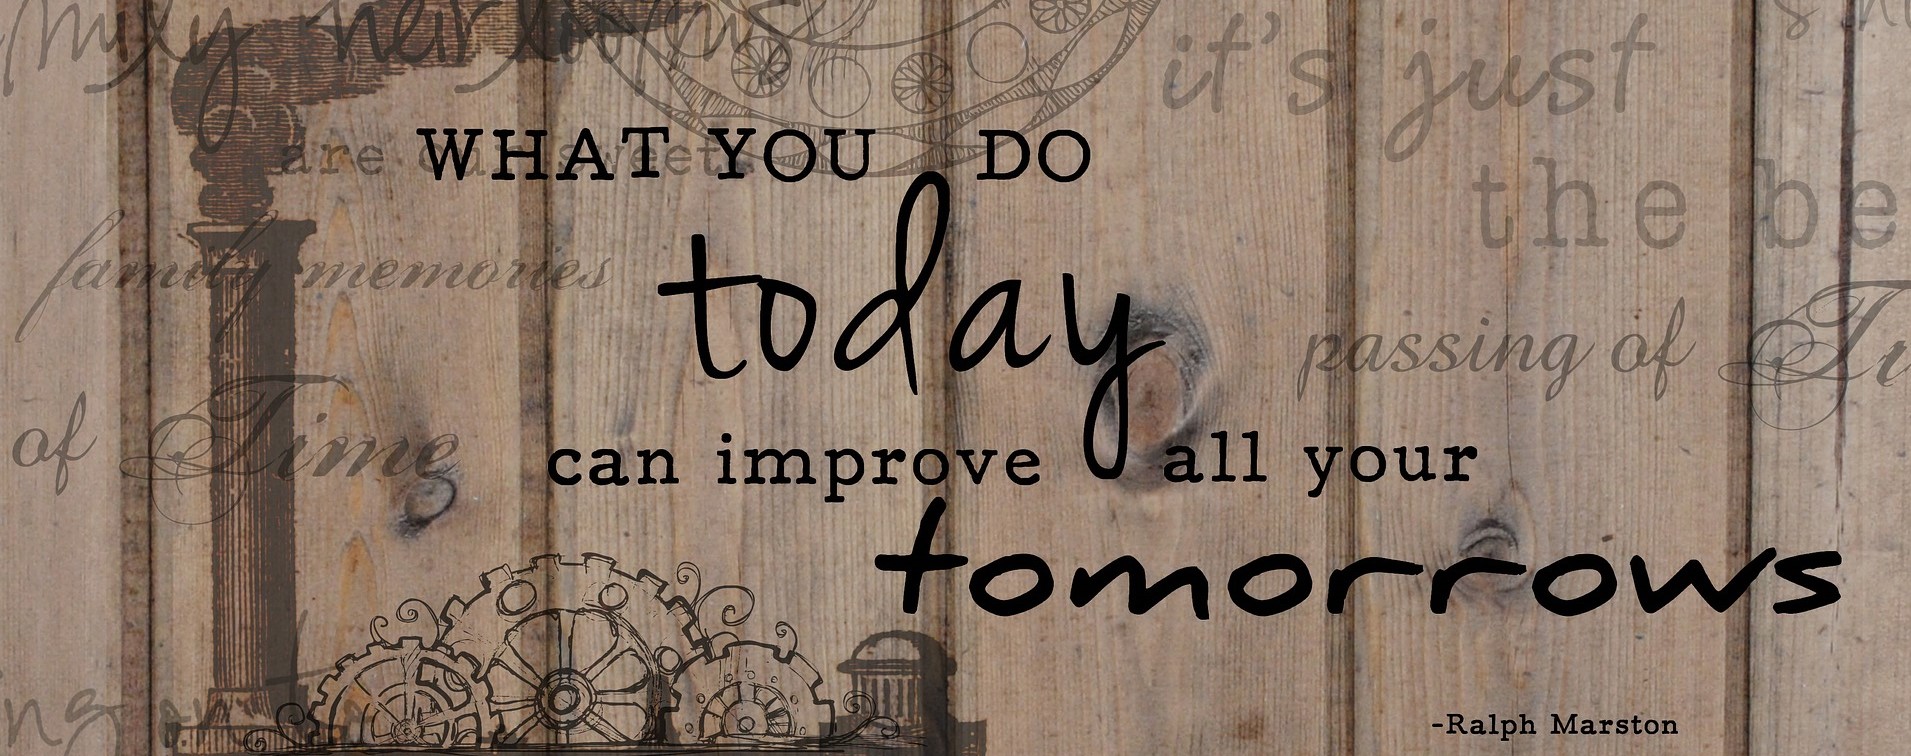 Motivational Quote What you do today can improve all your tomorrows by Raplh Marston on a wooden textured wall pic